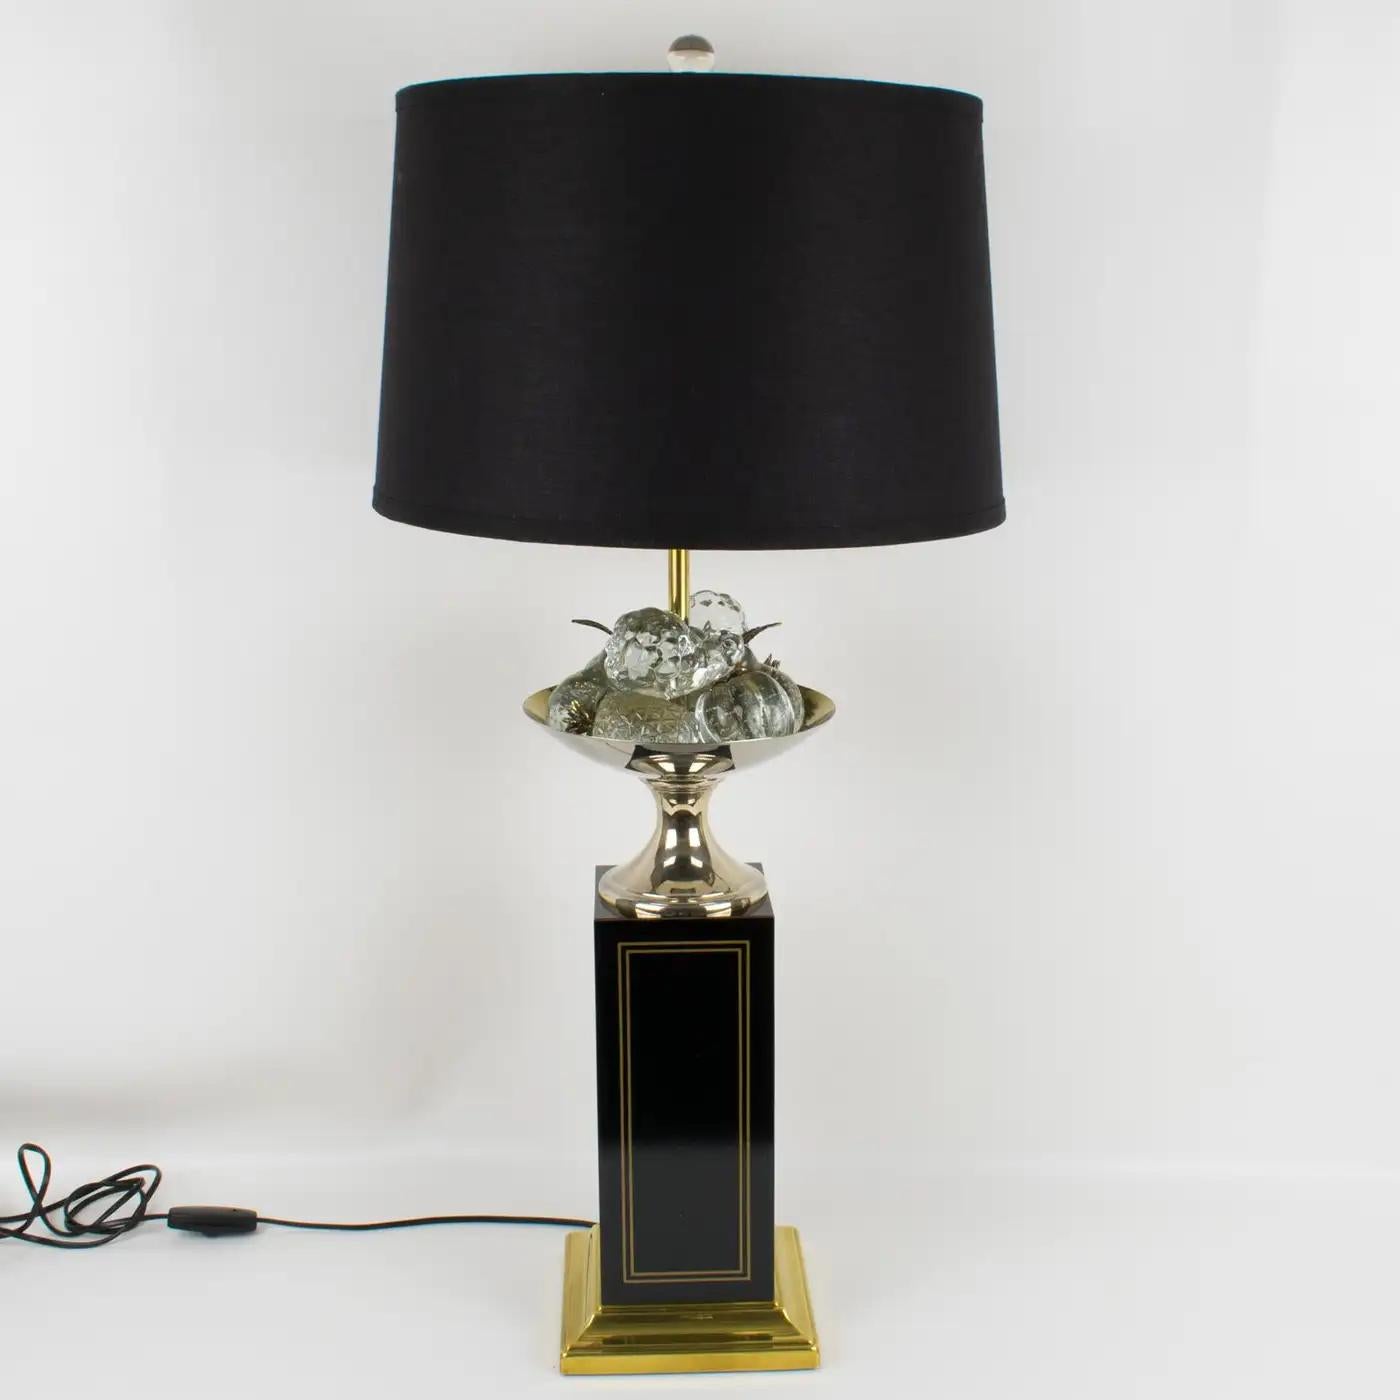 Maison Charles Table Lamp Black Enamel and Crystal Fruits, France 1960s For Sale 10